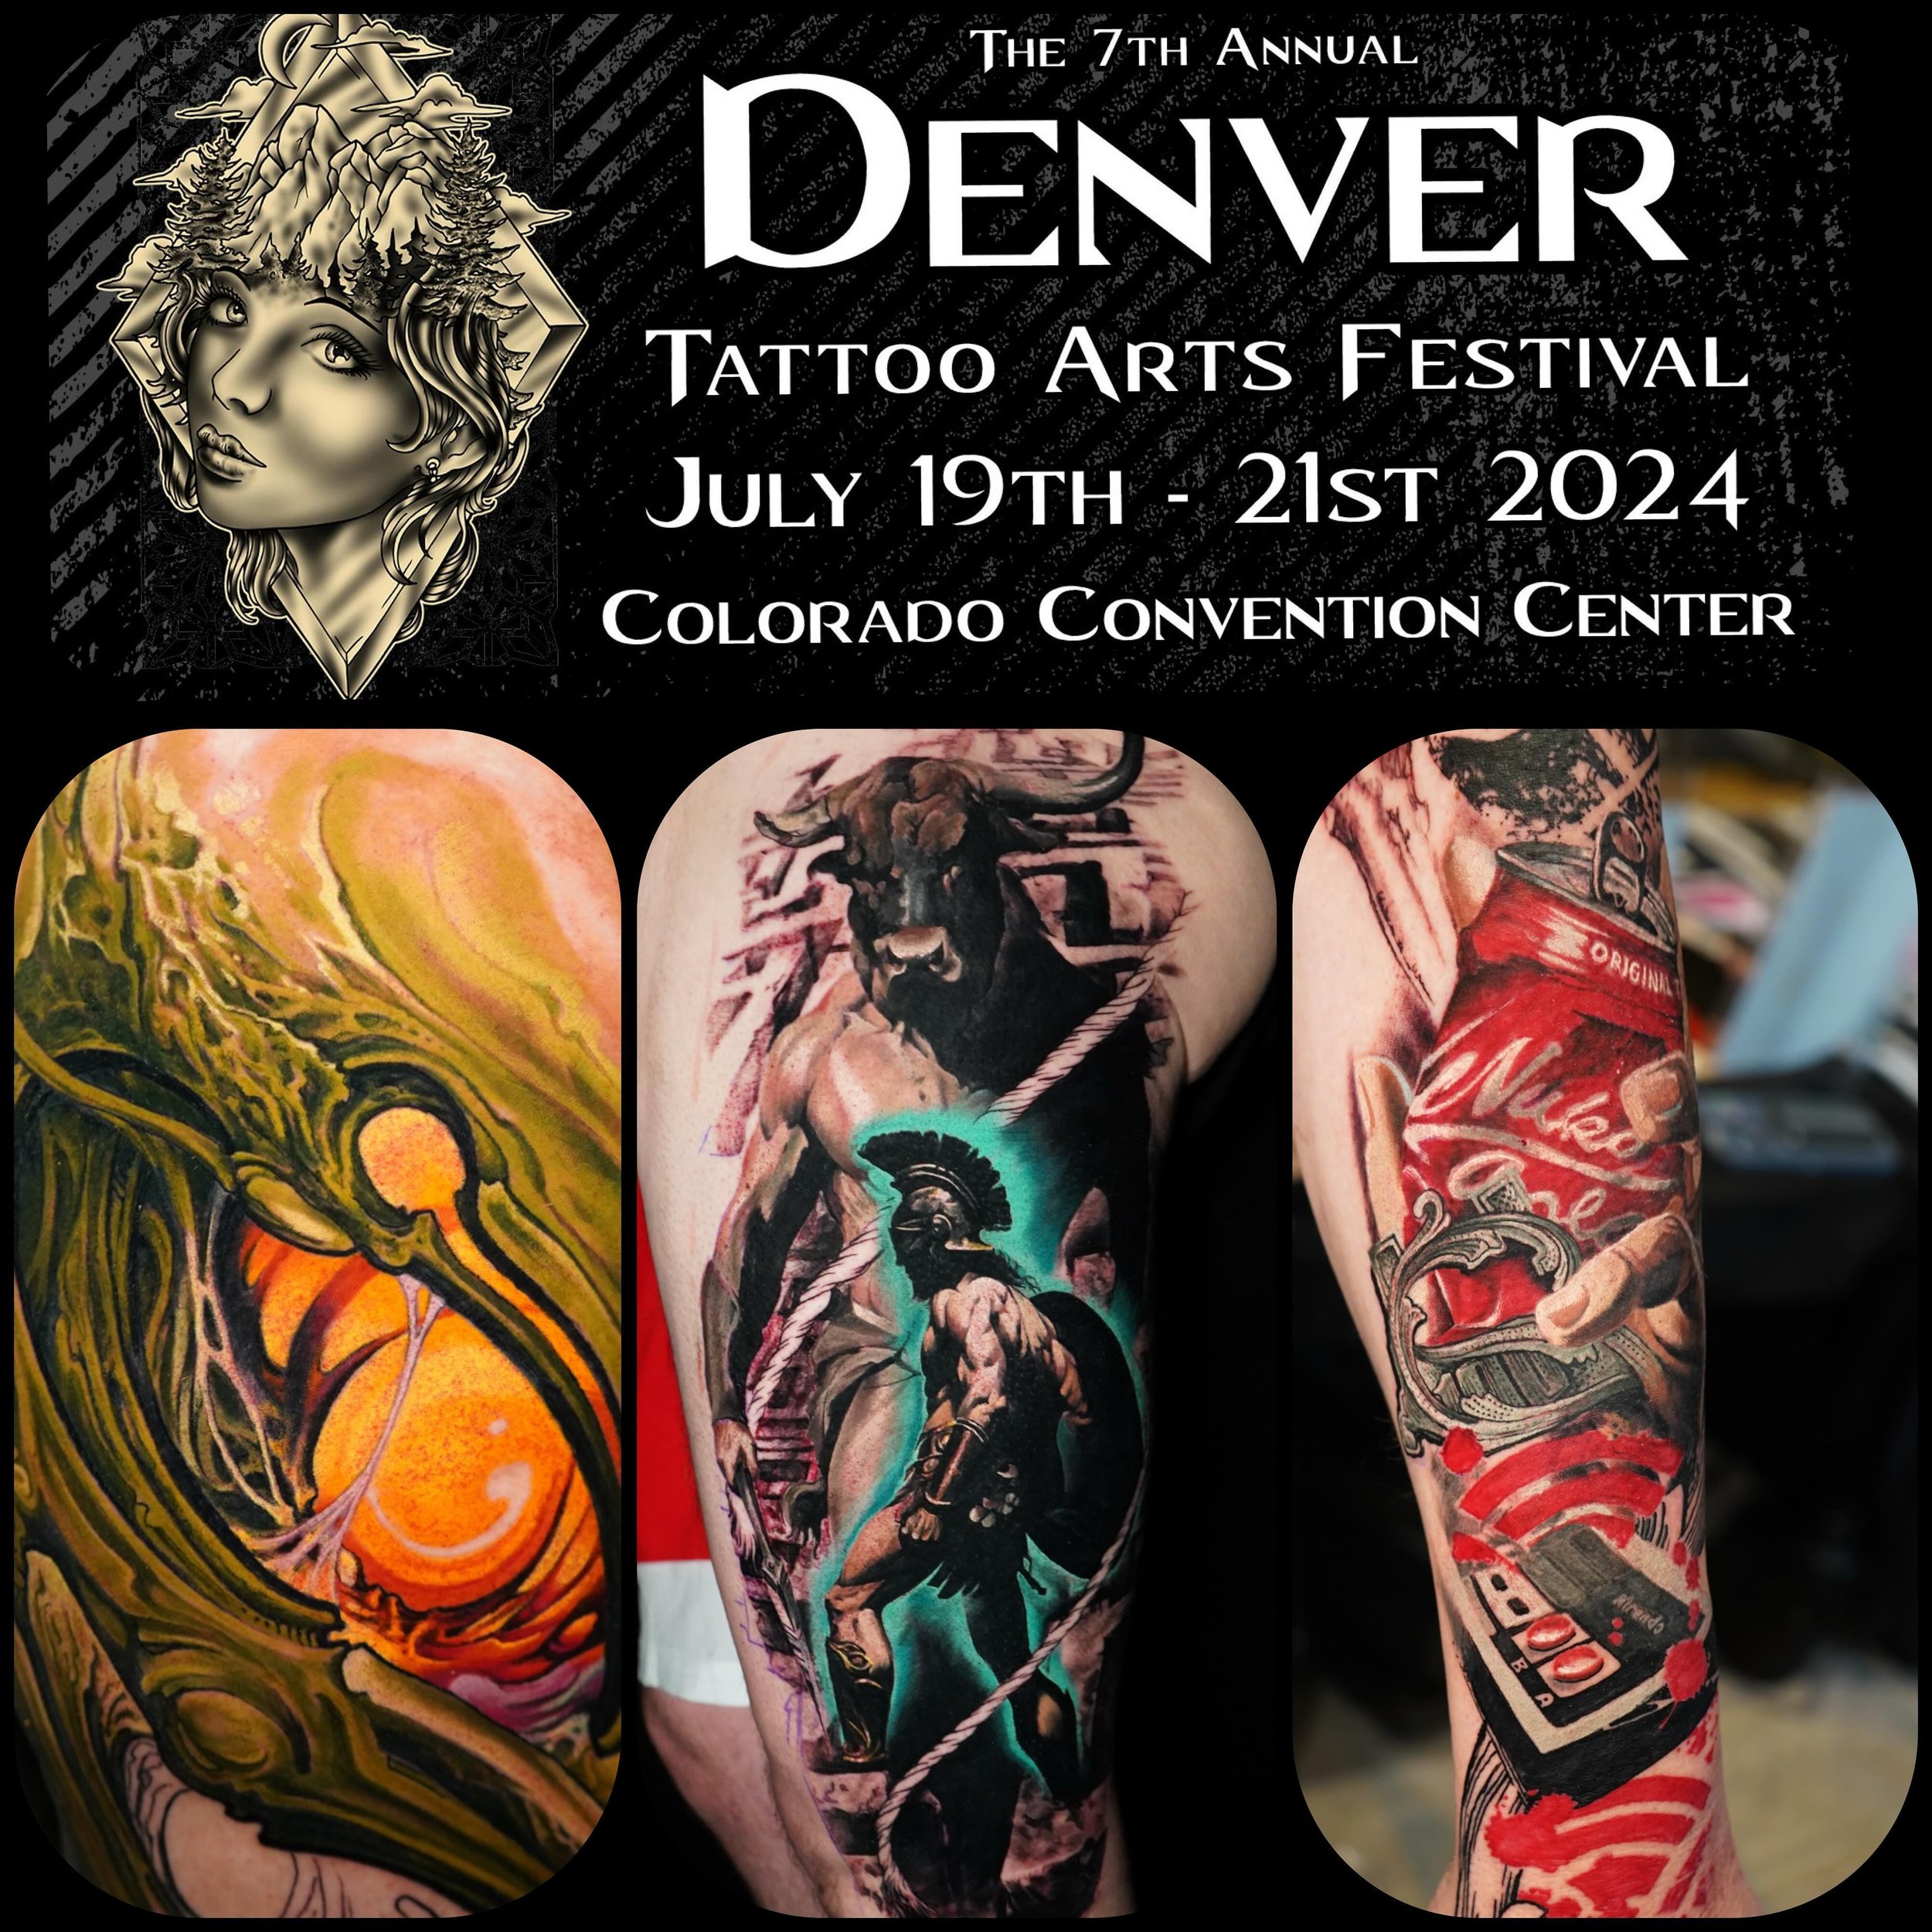 The #denvertattooconvention is right around the corner. Lets book dome fun projects for this one! #artesobscurae #realgone #realgonedenver #customtattoo #largescale #trashpolka #largescaletattoo #denvertattooartist #originalart #darlgnau #coloradotat